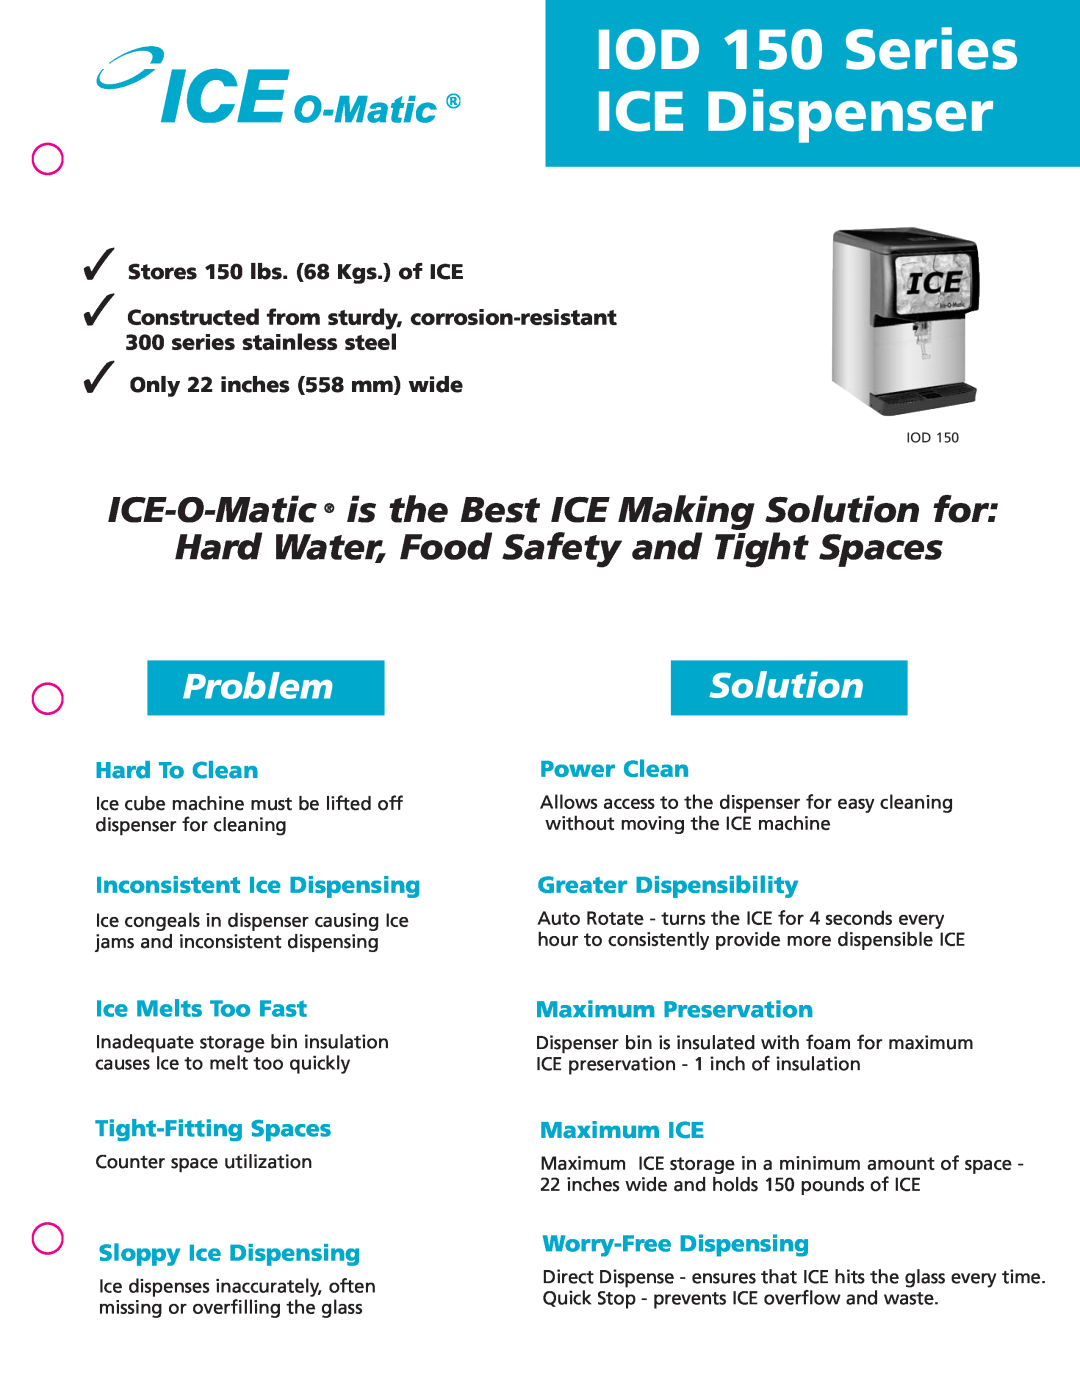 Ice-O-Matic IOD 150 Series manual ICE Dispenser, Problem, Solution 